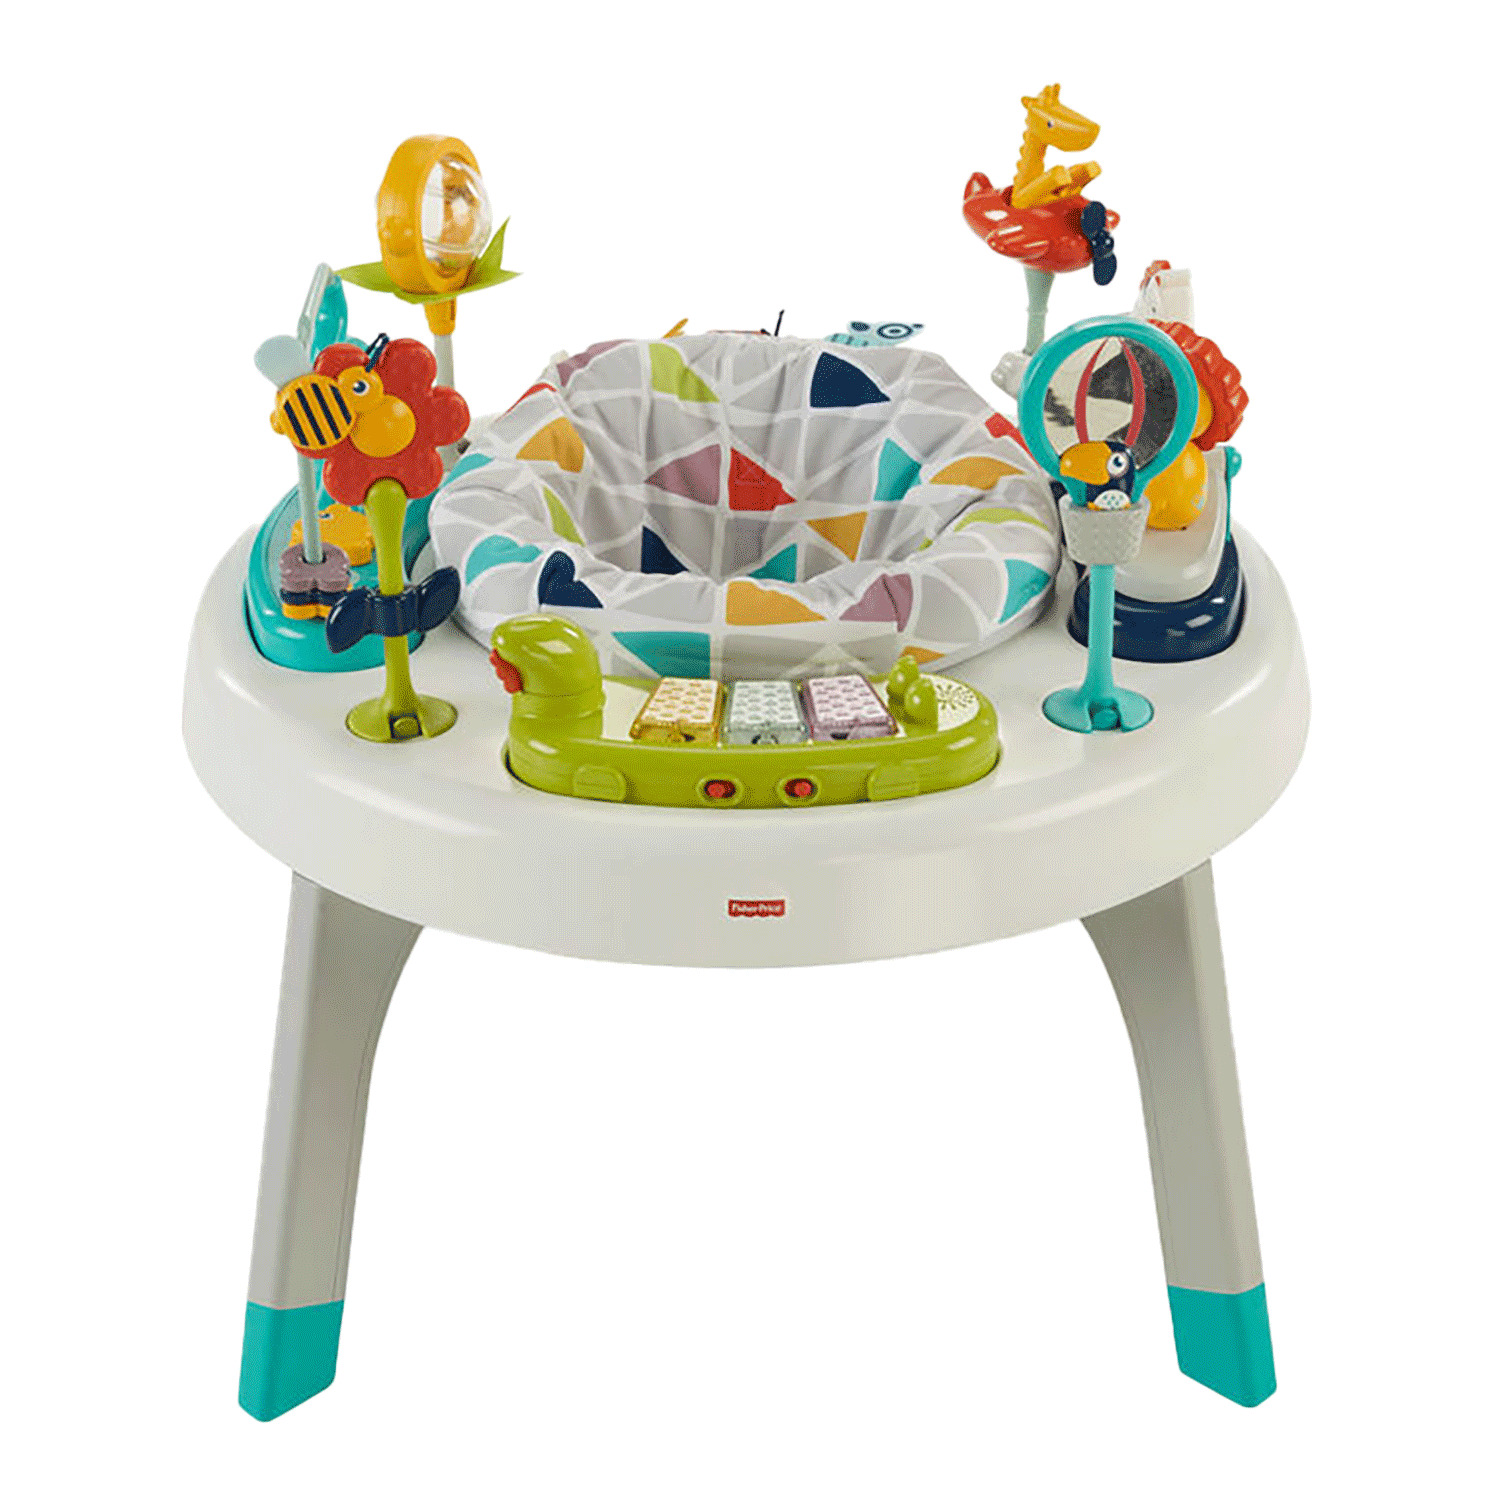 Fisher-Price - 2-in-1 Sit-to-stand activity center